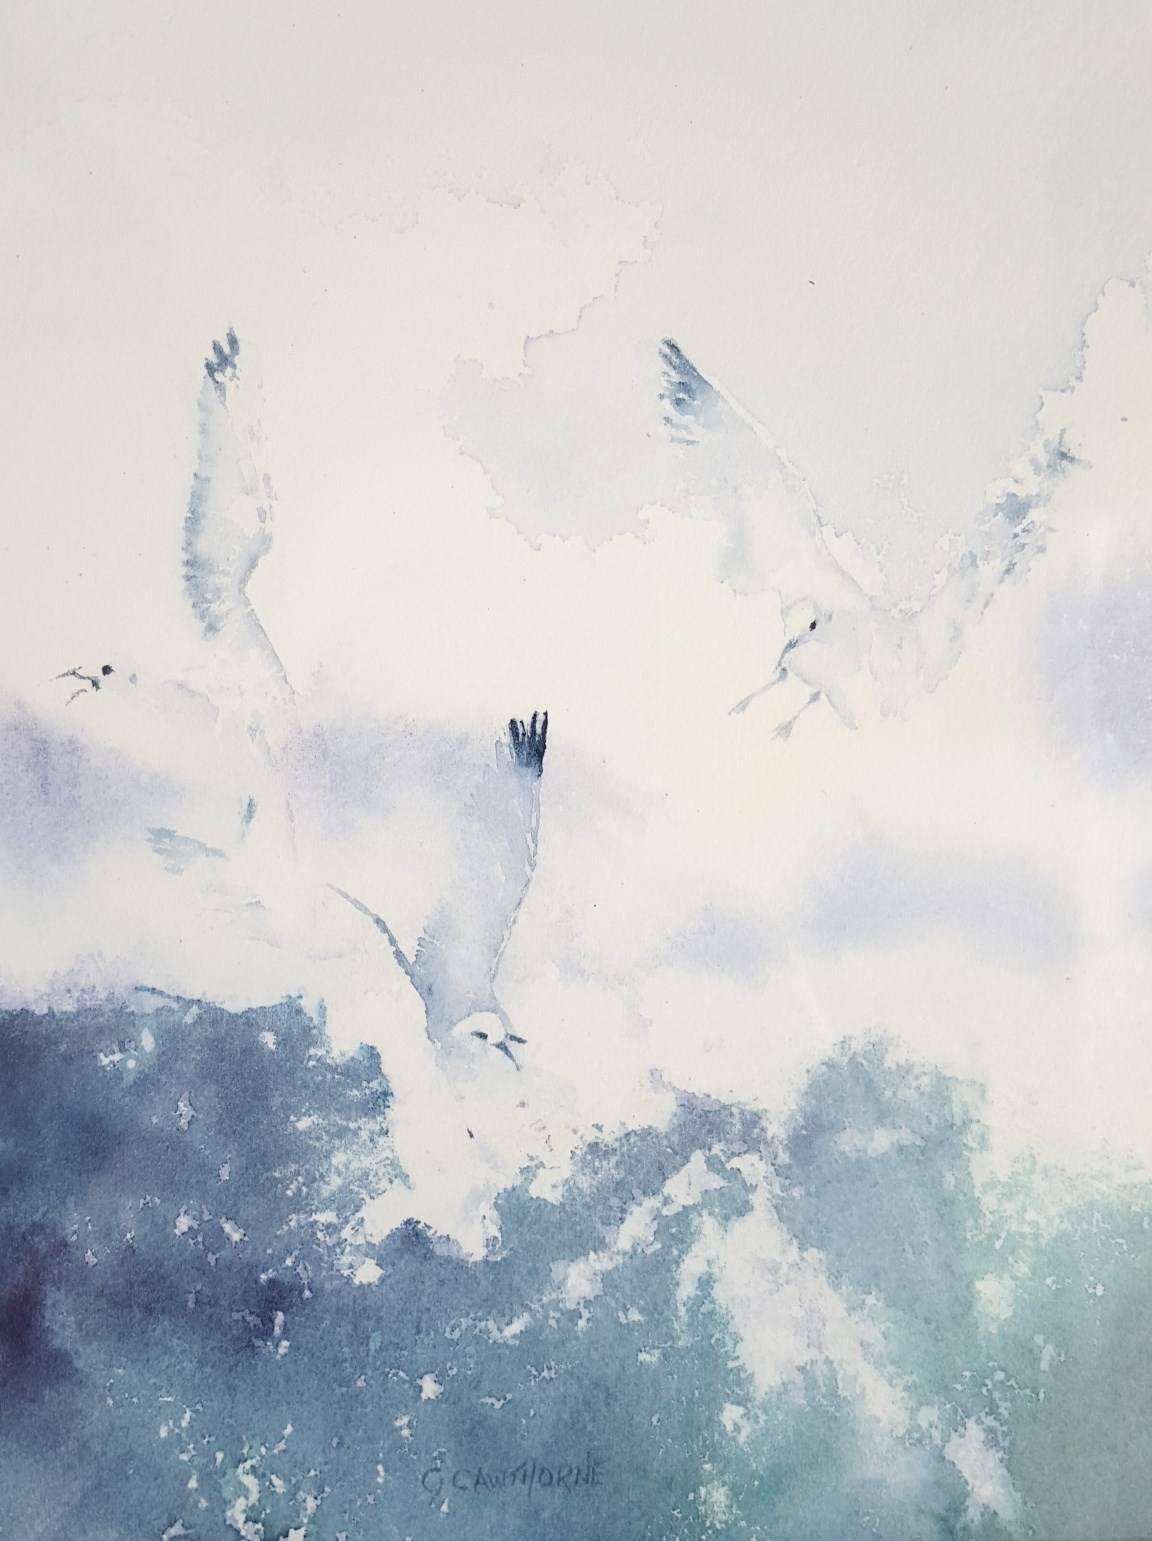 An original signed watercolor by English artist Gillie Cawthorne (1963-) titled "Flight of the Seagulls", 2012. Signed by Cawthorne lower right. This beautiful watercolor painting is superbly framed with moulding from Spain, matting from